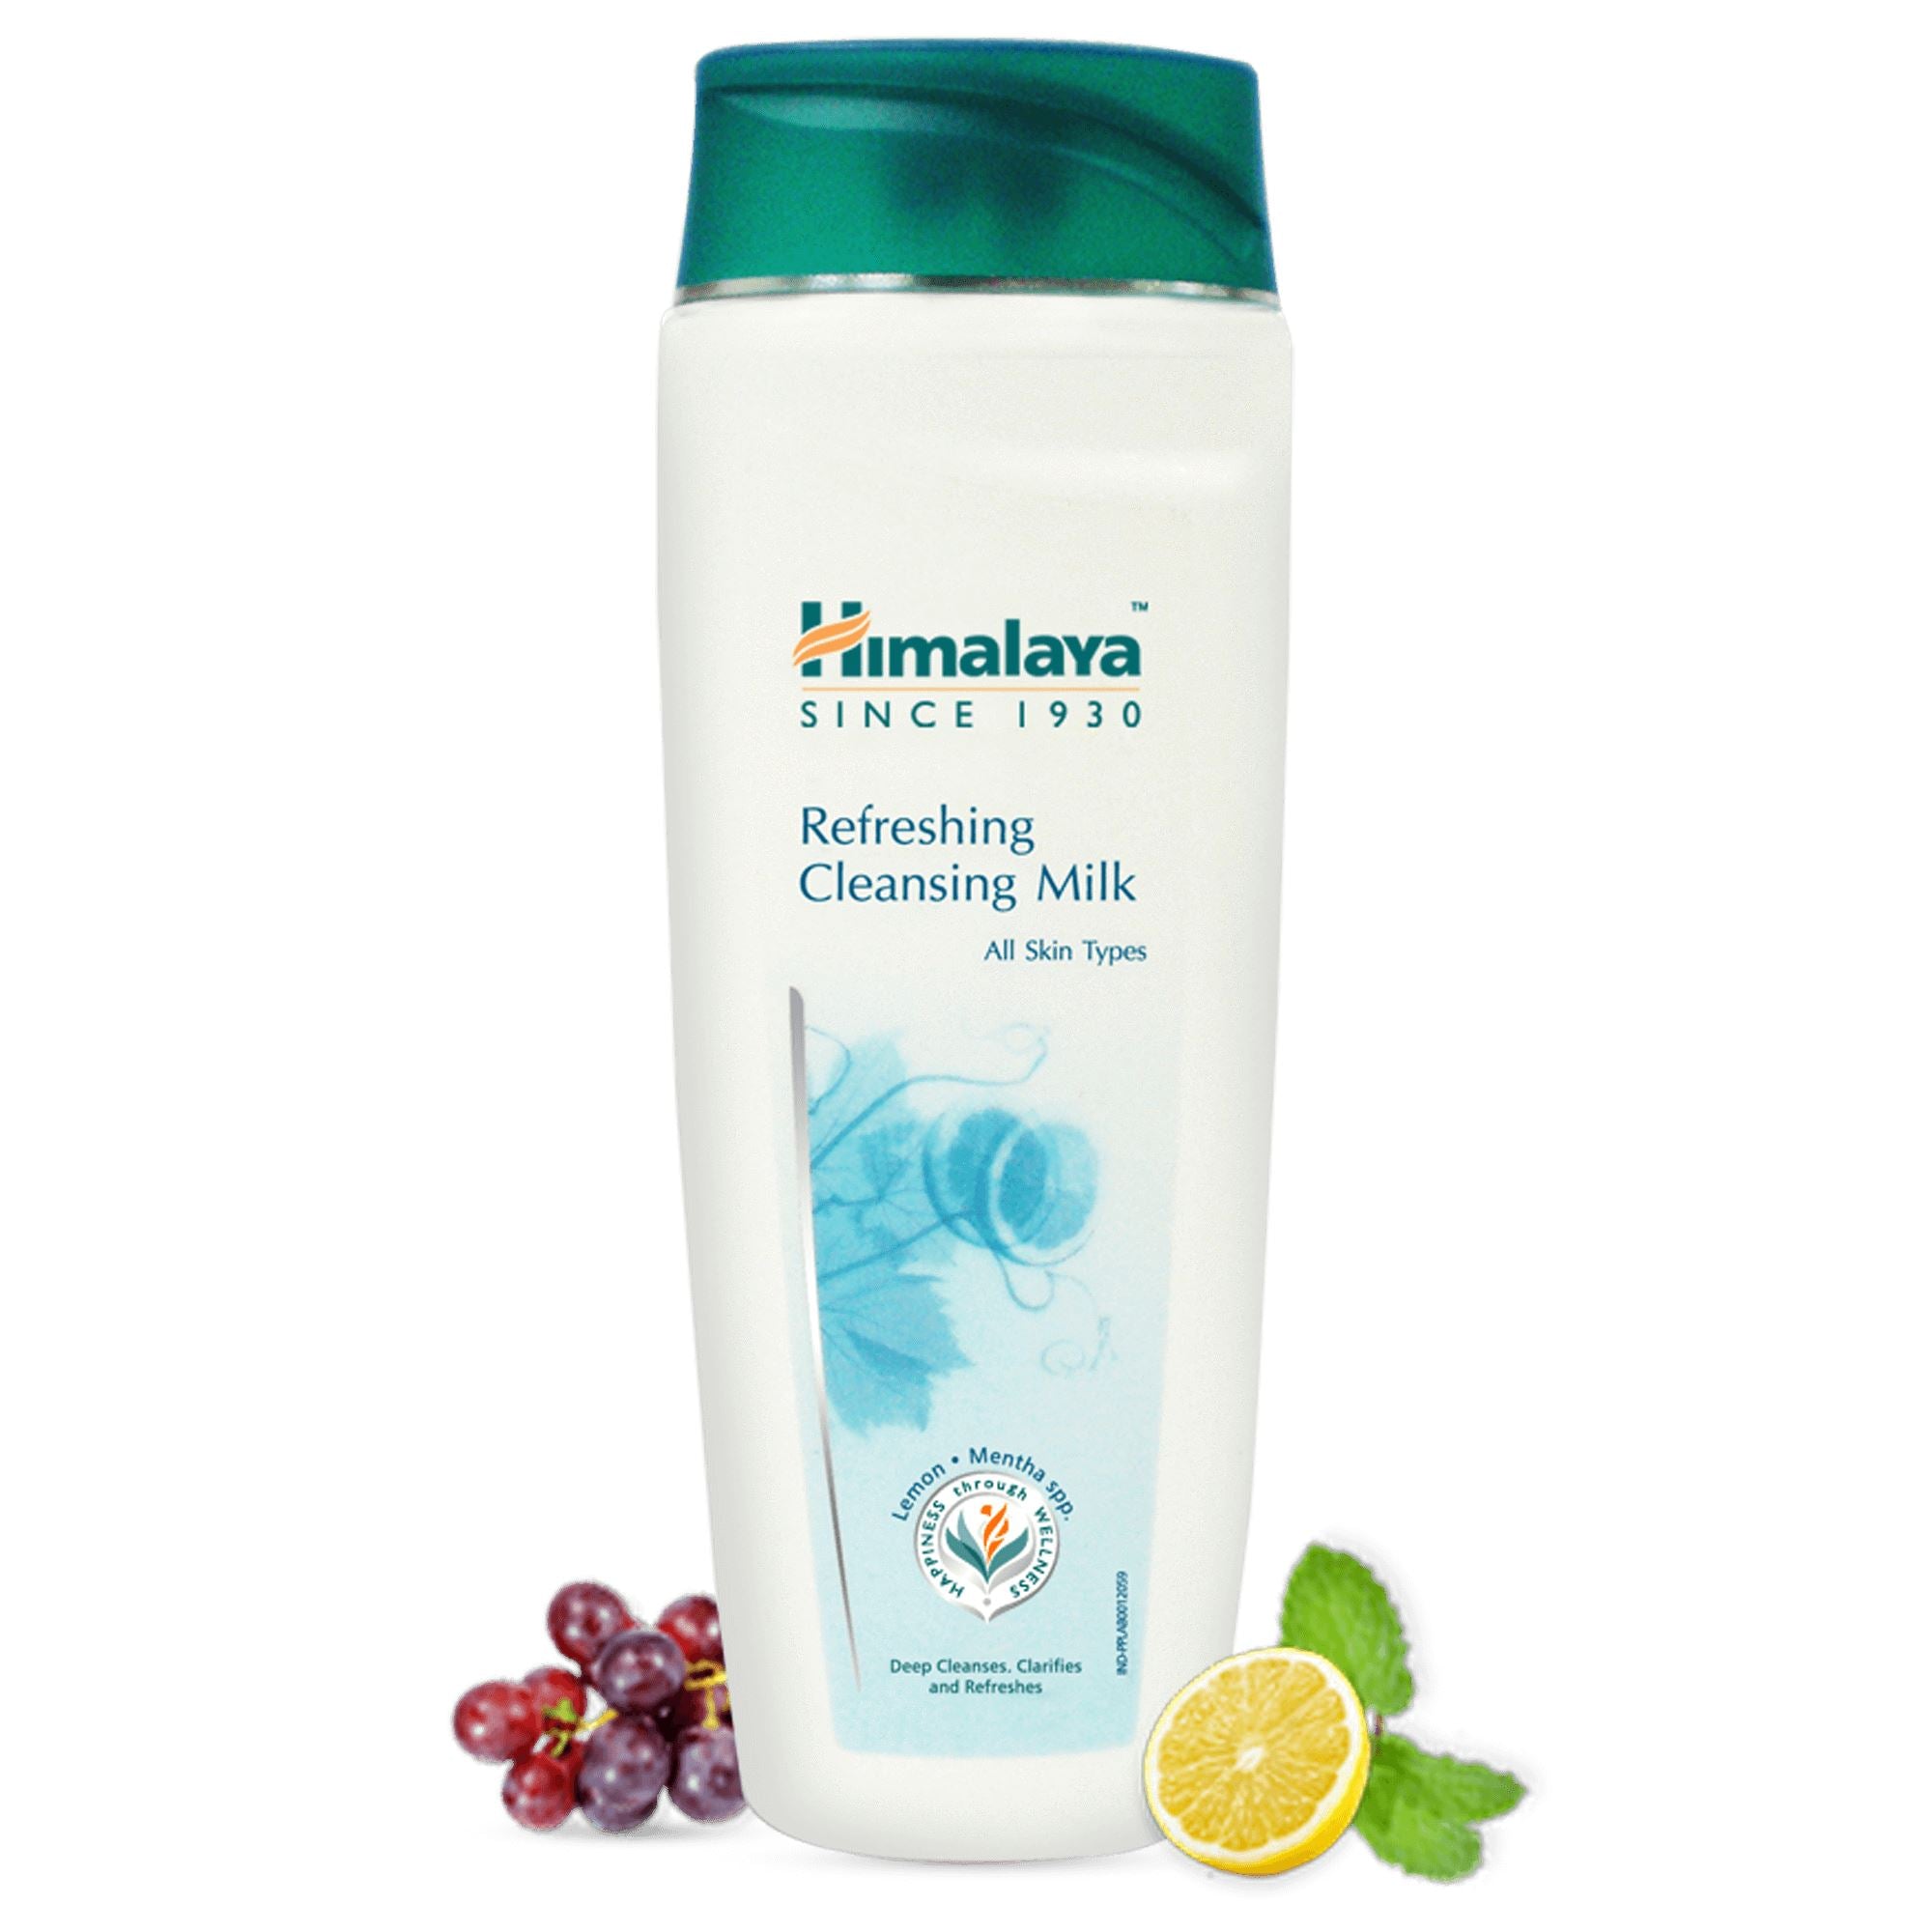 Himalaya Refreshing Cleansing Milk - Deep cleanses, clarifies and refreshes